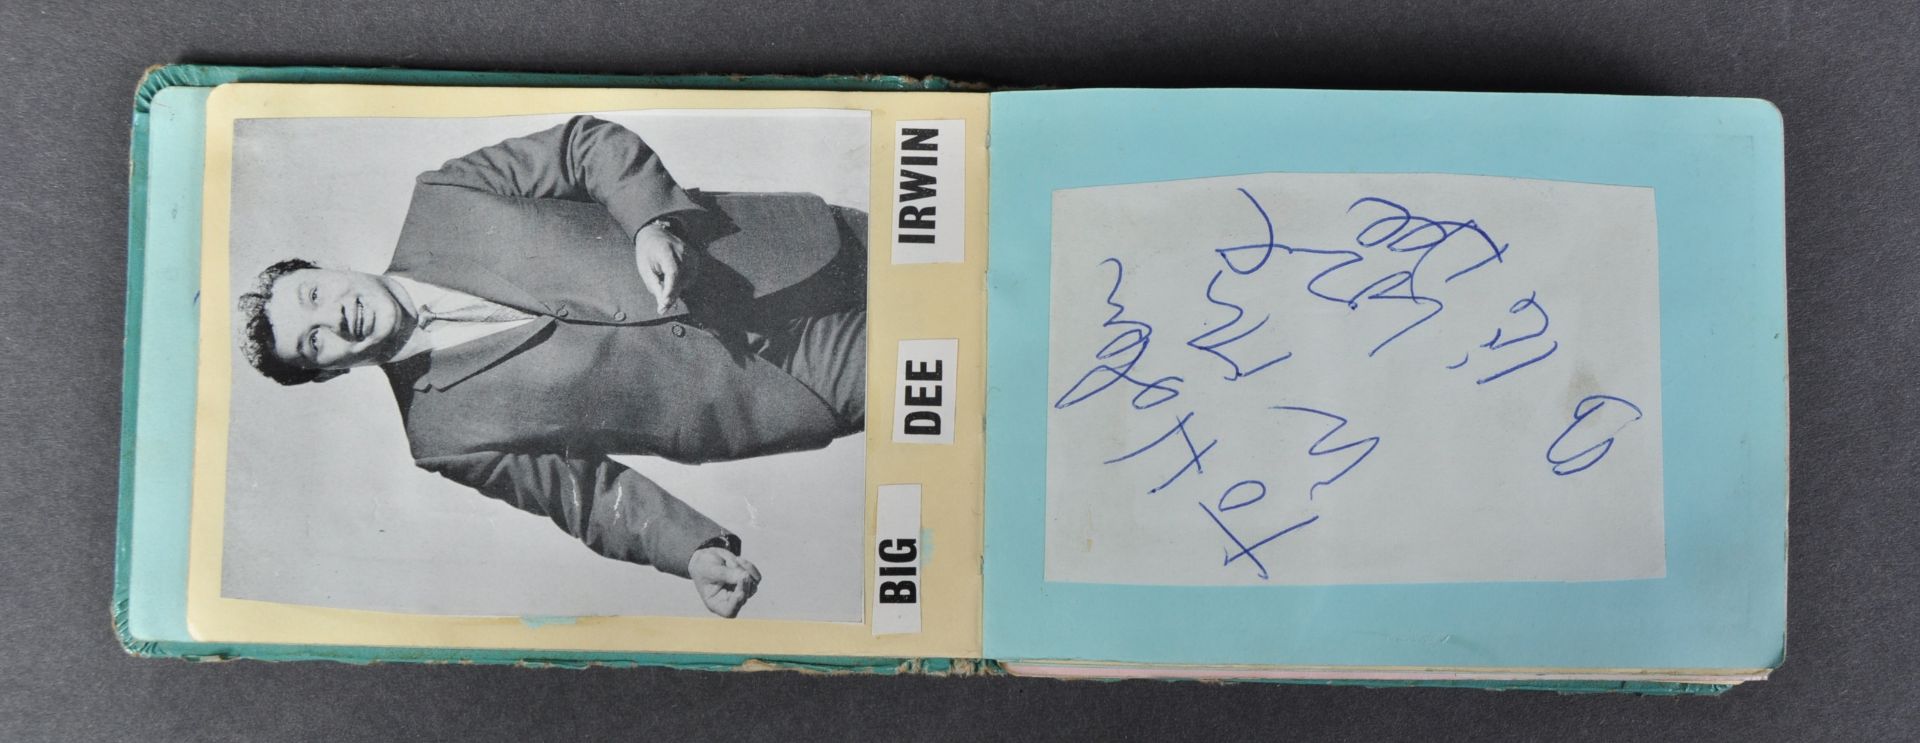 1960S MUSIC AUTOGRAPH ALBUMS - OBTAINED FROM DISCS-A-GOGO - Image 6 of 31